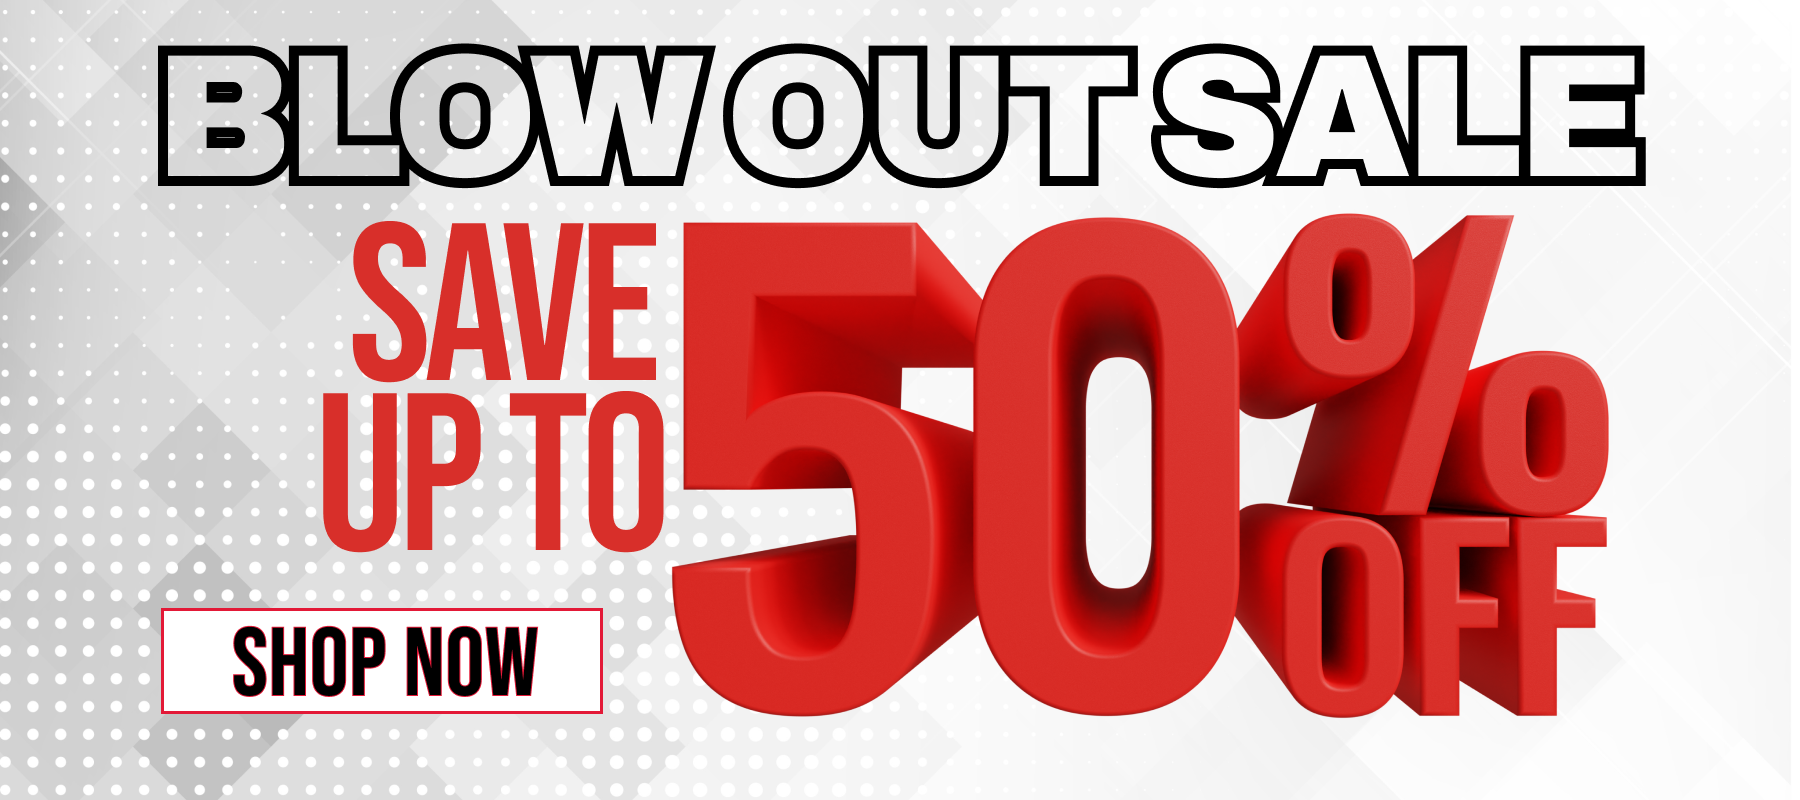 BLOW OUT SALE//Save Up To 50%Off//Shop Now